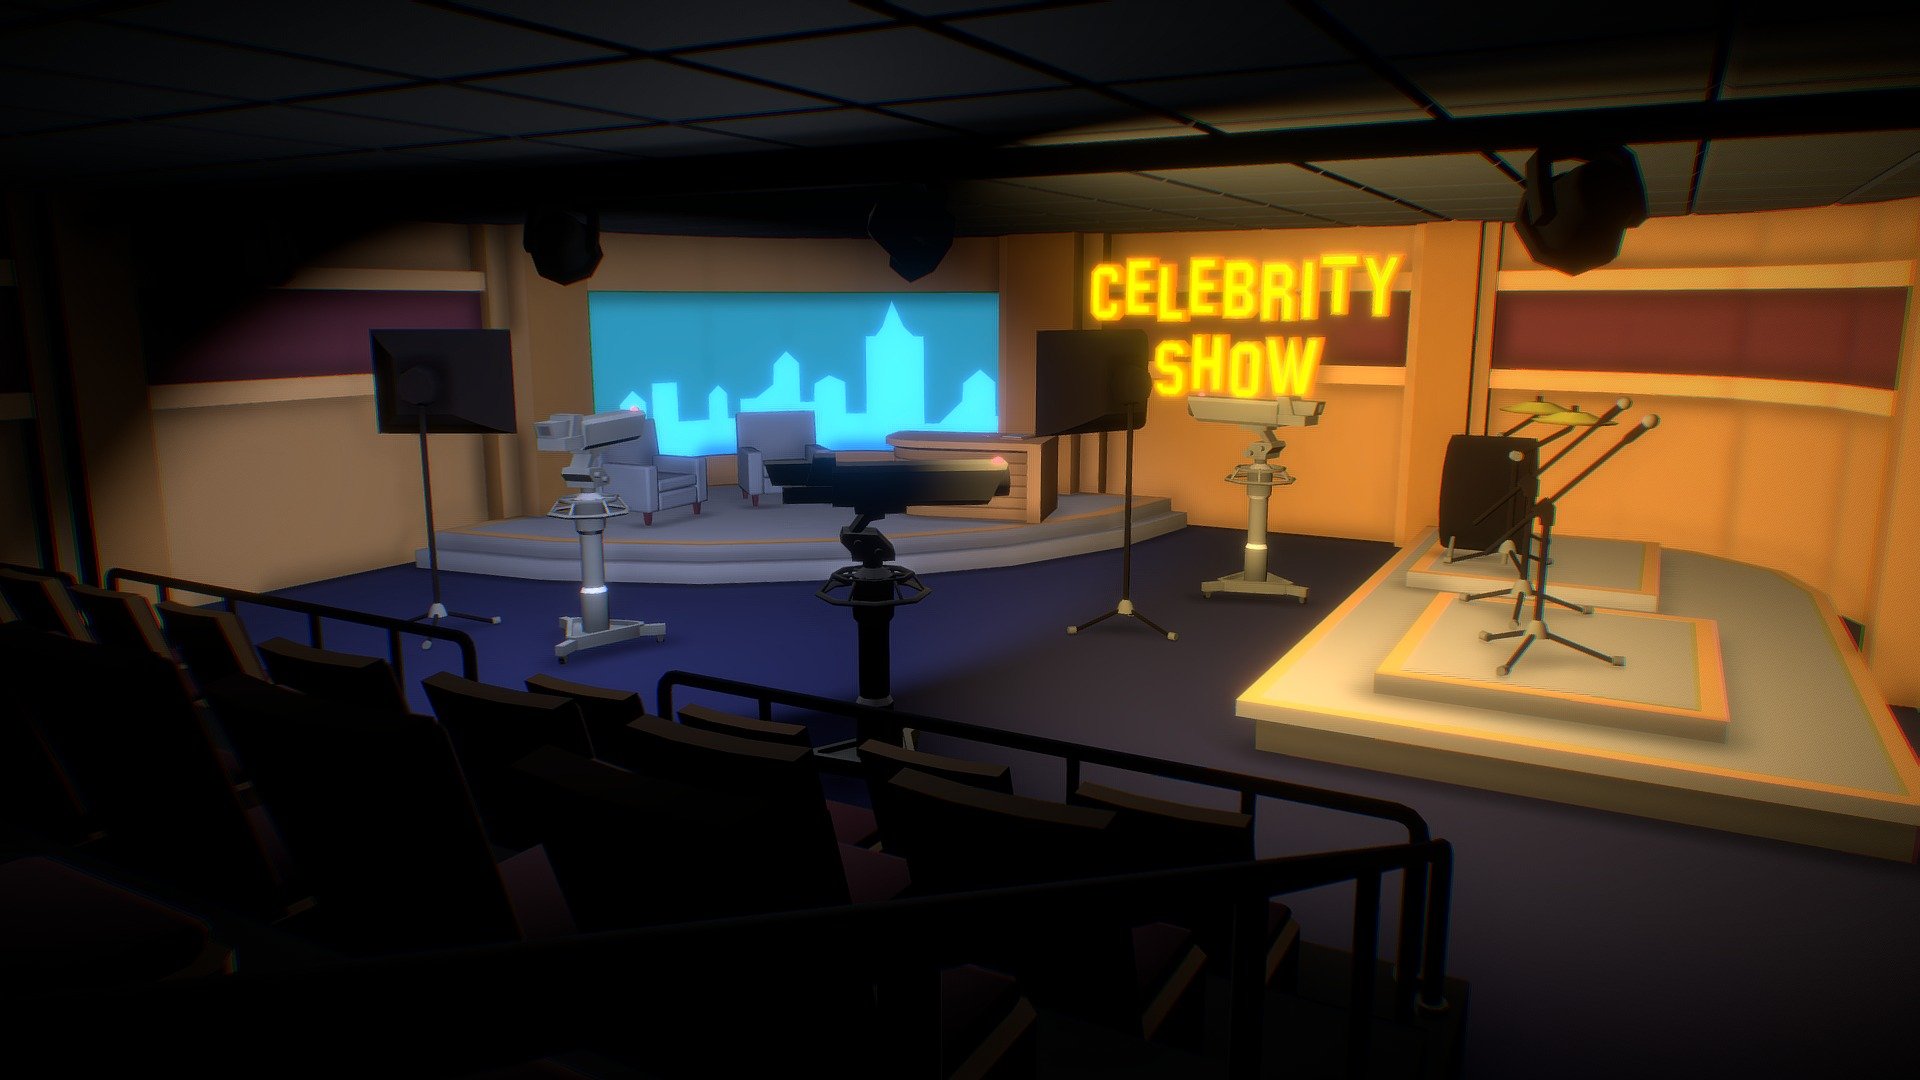 https://omicron.games/ - Talk Show Studio - 3D model by OmicronGames 3d model